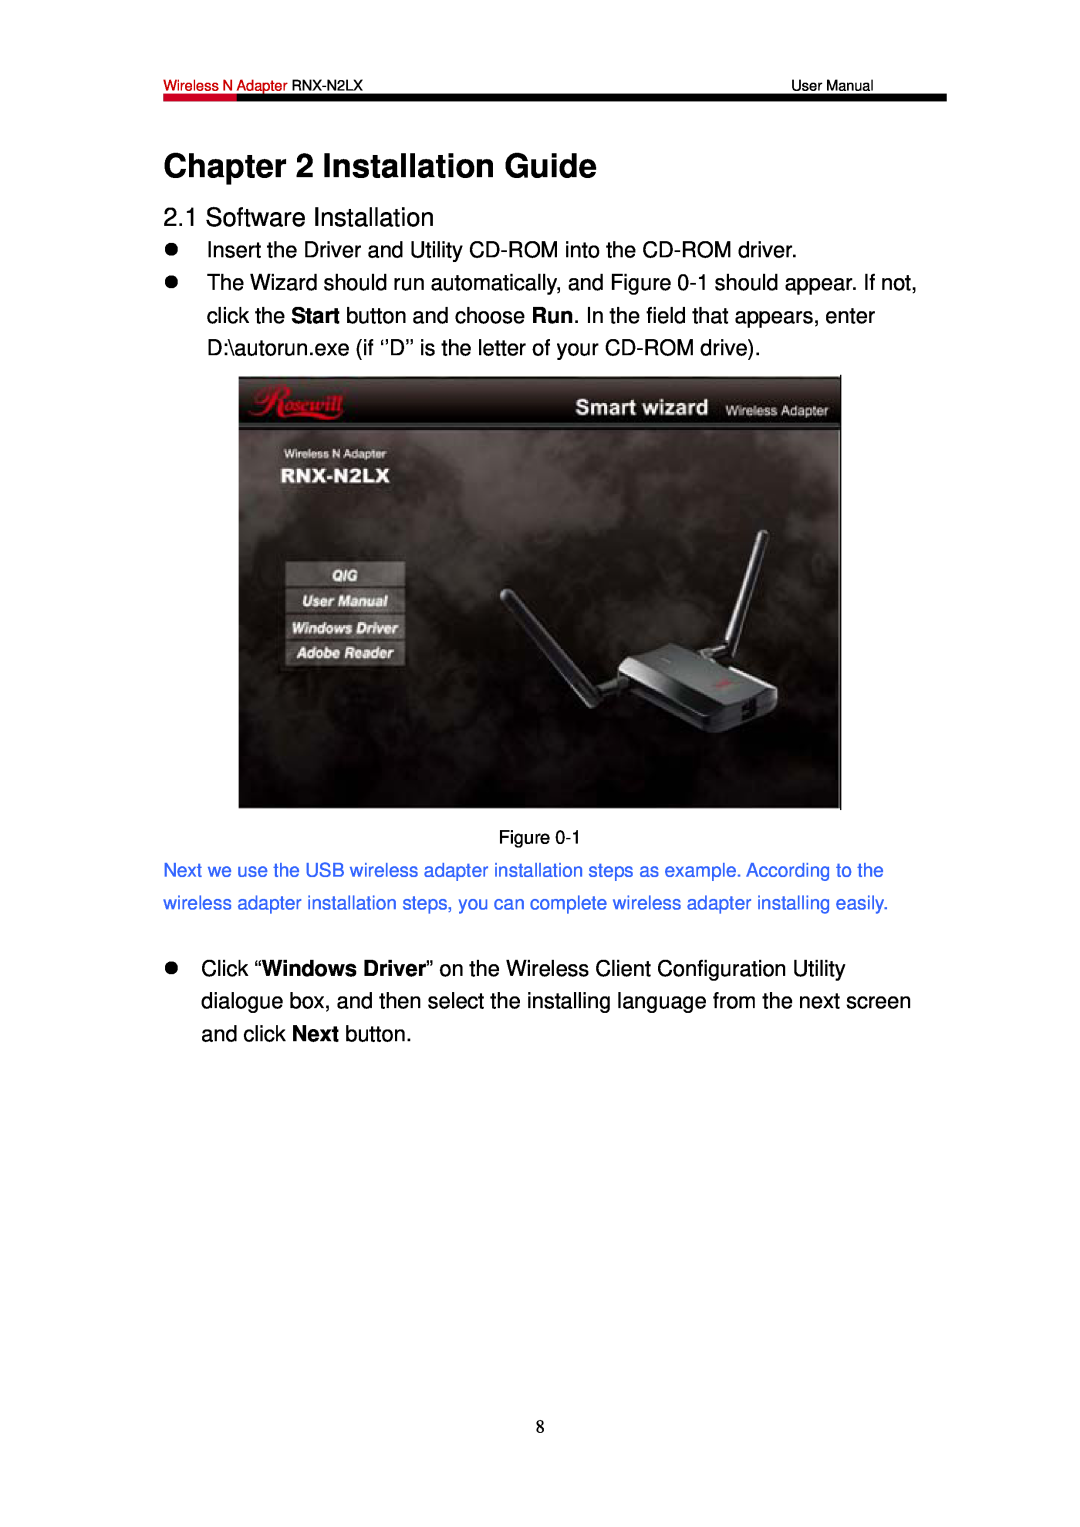 Rosewill RNX-N2LX user manual Installation Guide, Software Installation 